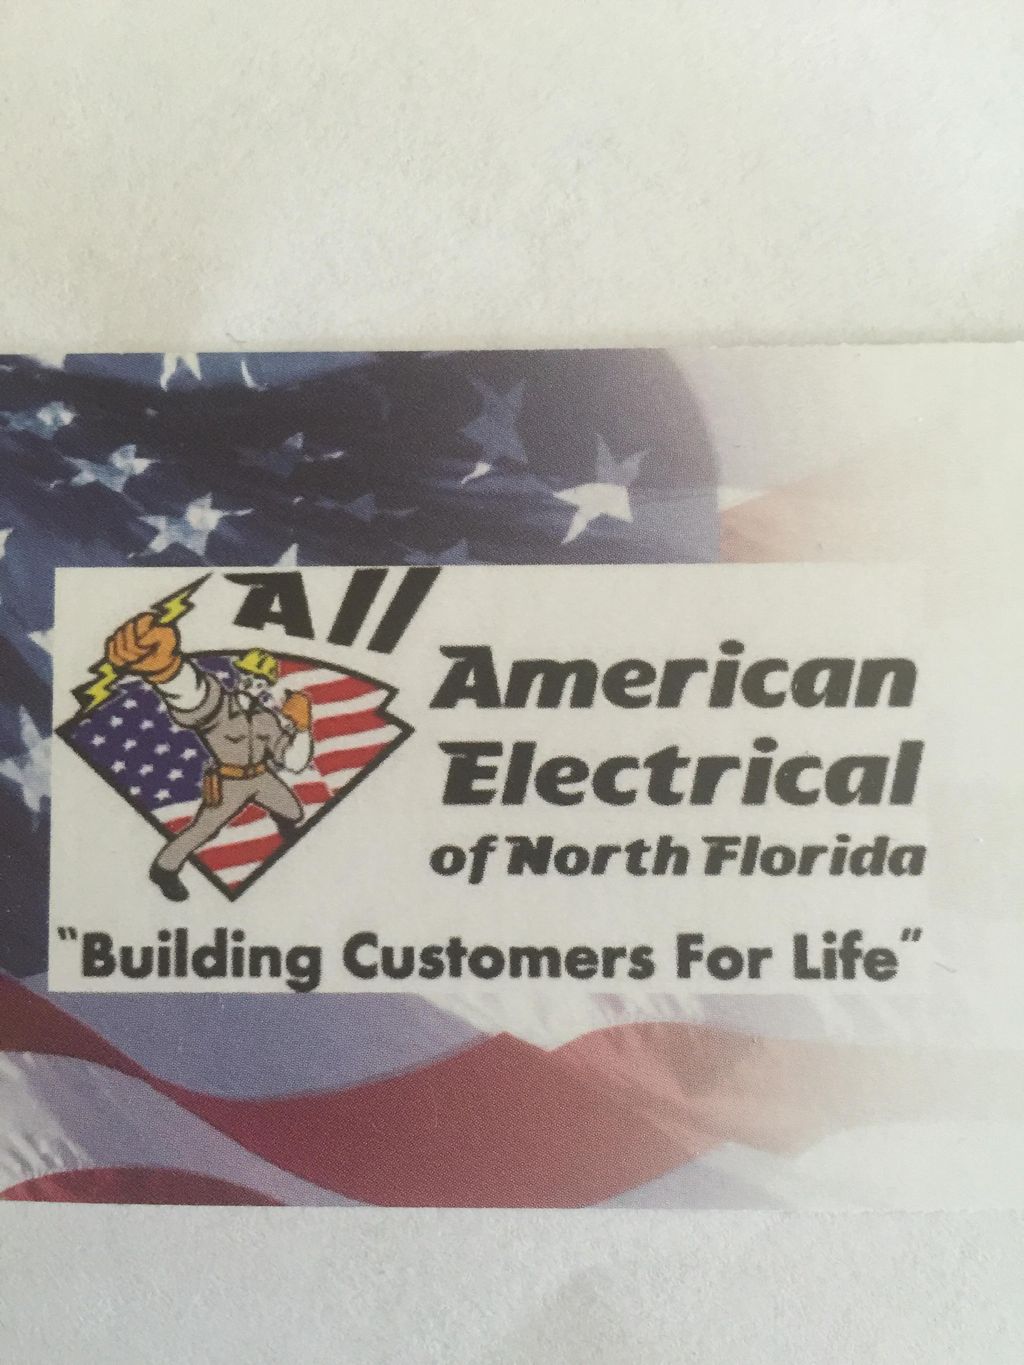 All American Electrical of North Florida